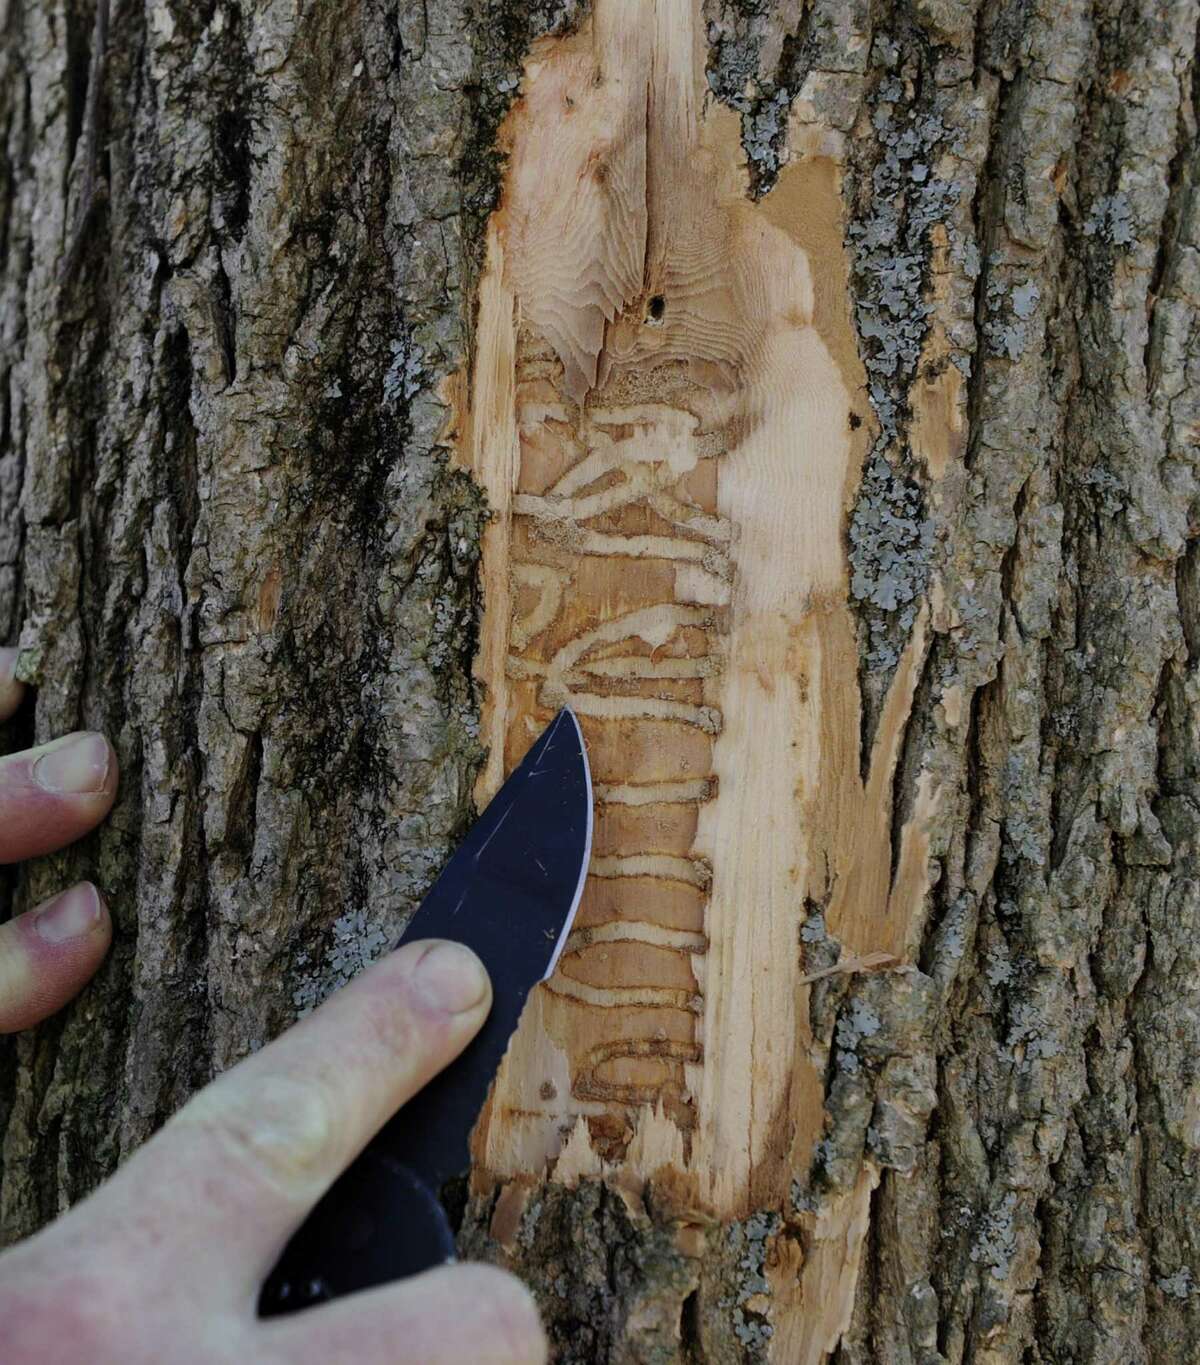 Matt Bartelme strips away bark on an ash tree to expose evidence of an infestation of emerald ash borer, a tree-killing pest, at a Danbury, Conn., home, Friday, March 11, 2016.